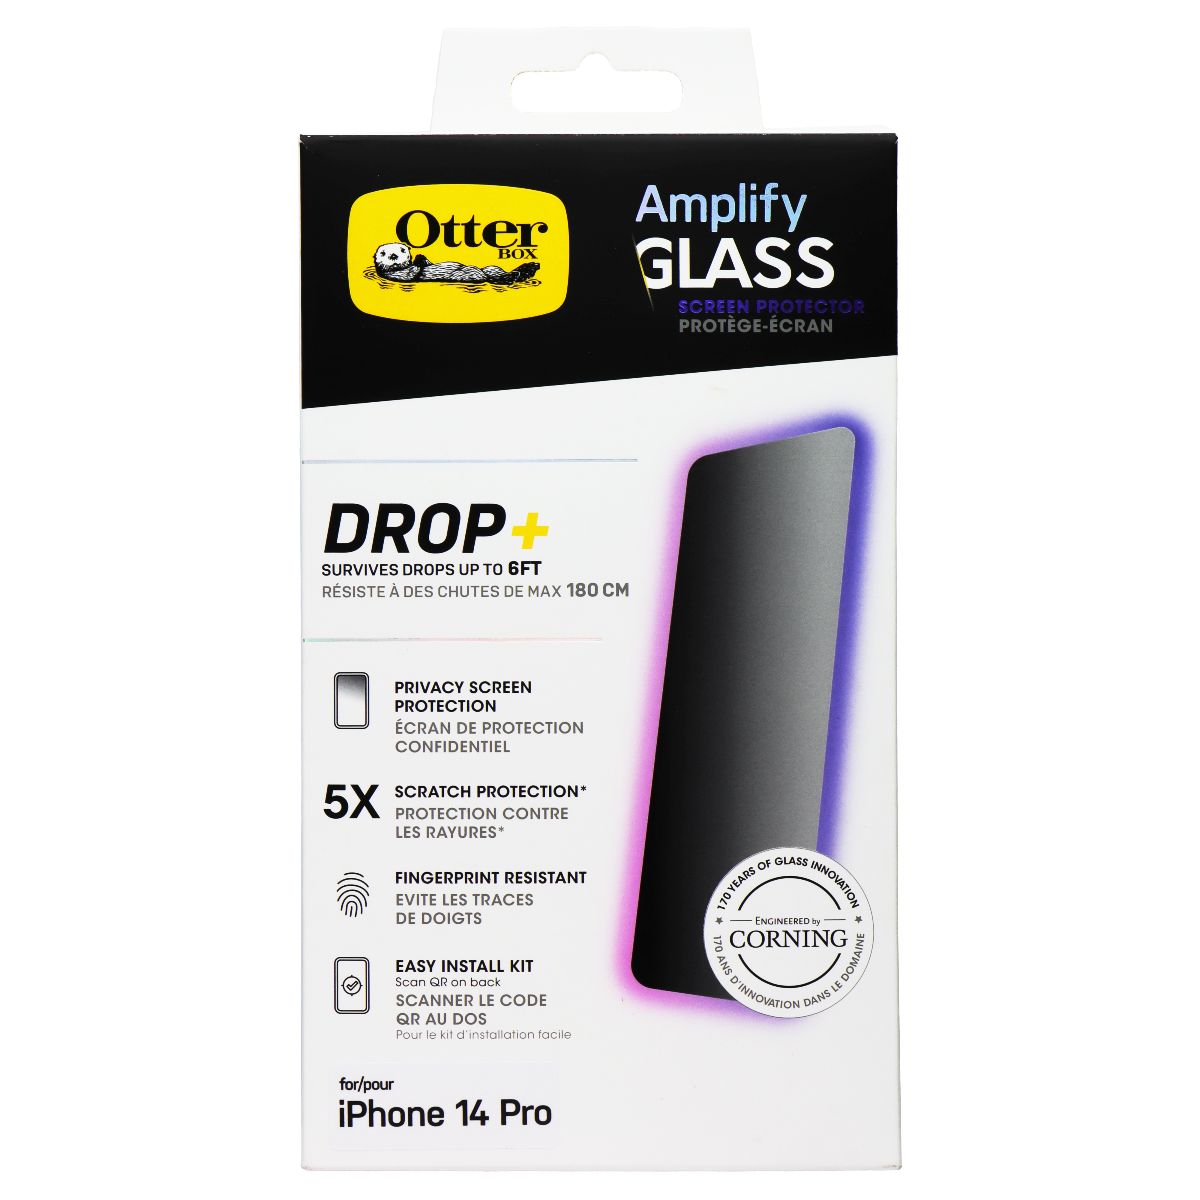 OtterBox AMPLIFY GLASS PRIVACY Screen Protector for Apple iPhone 14 Pro (ONLY)